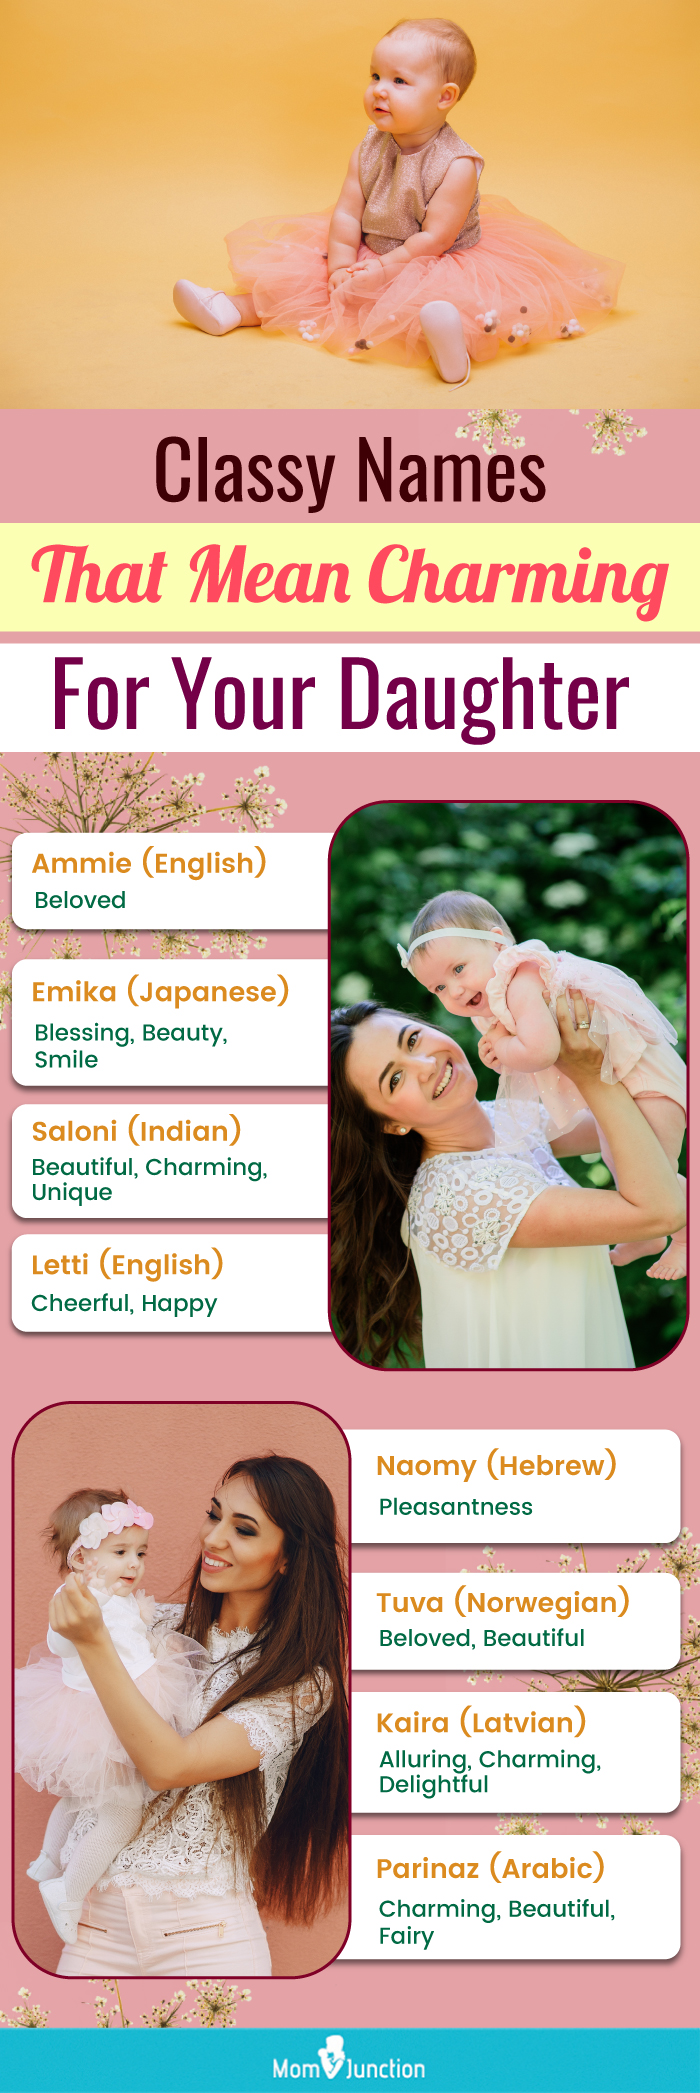 classy names that mean charming for your daughter (infographic)